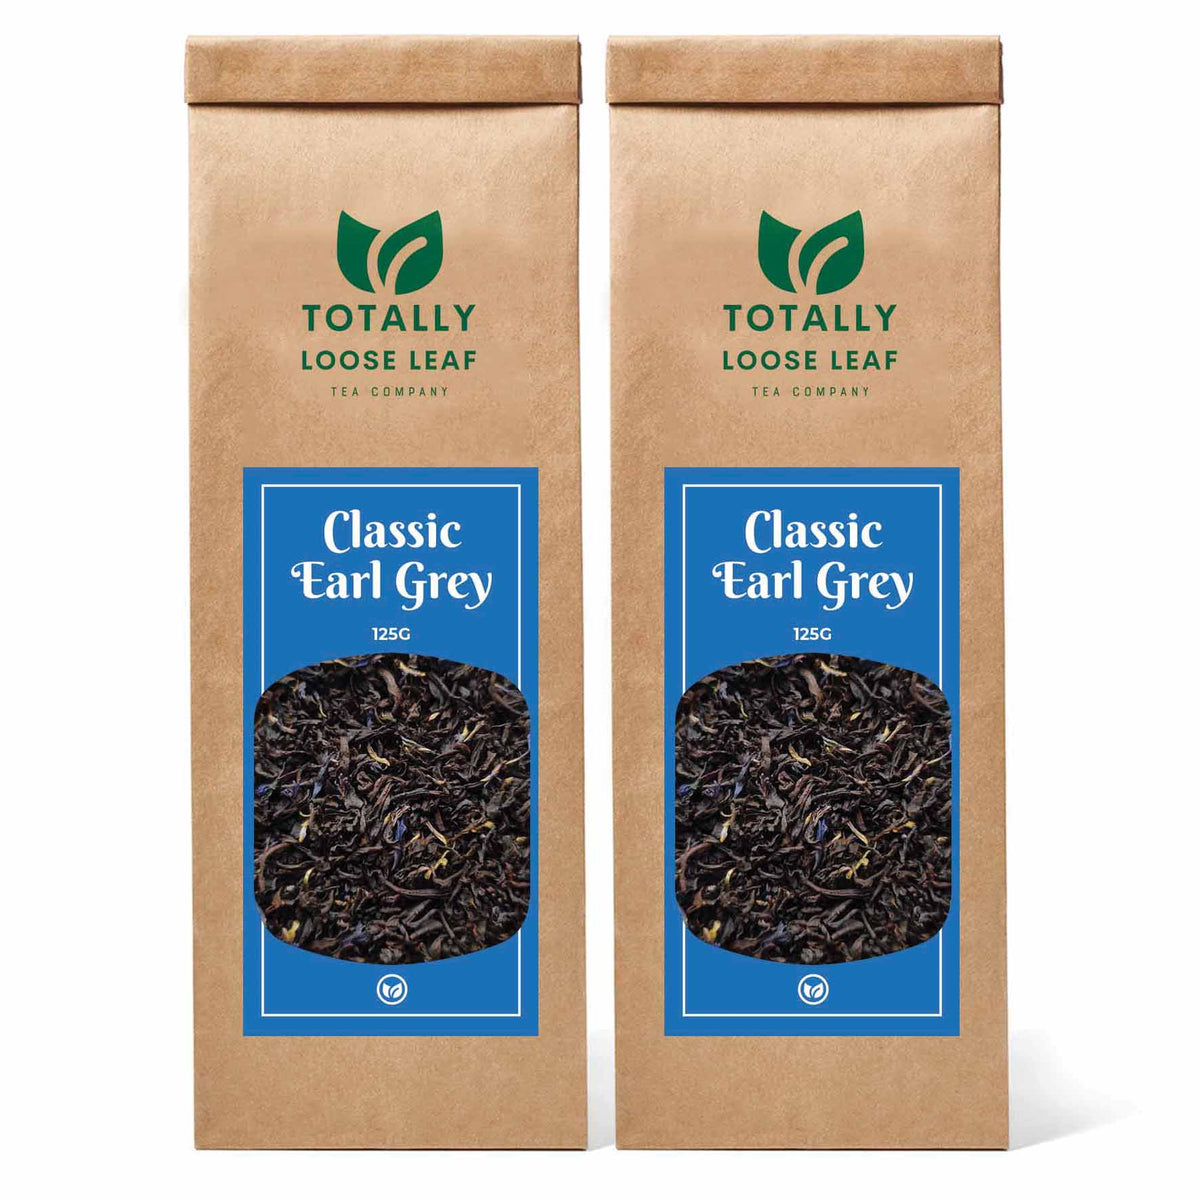 Classic Earl Grey Breakfast Loose Leaf Tea - two pouches